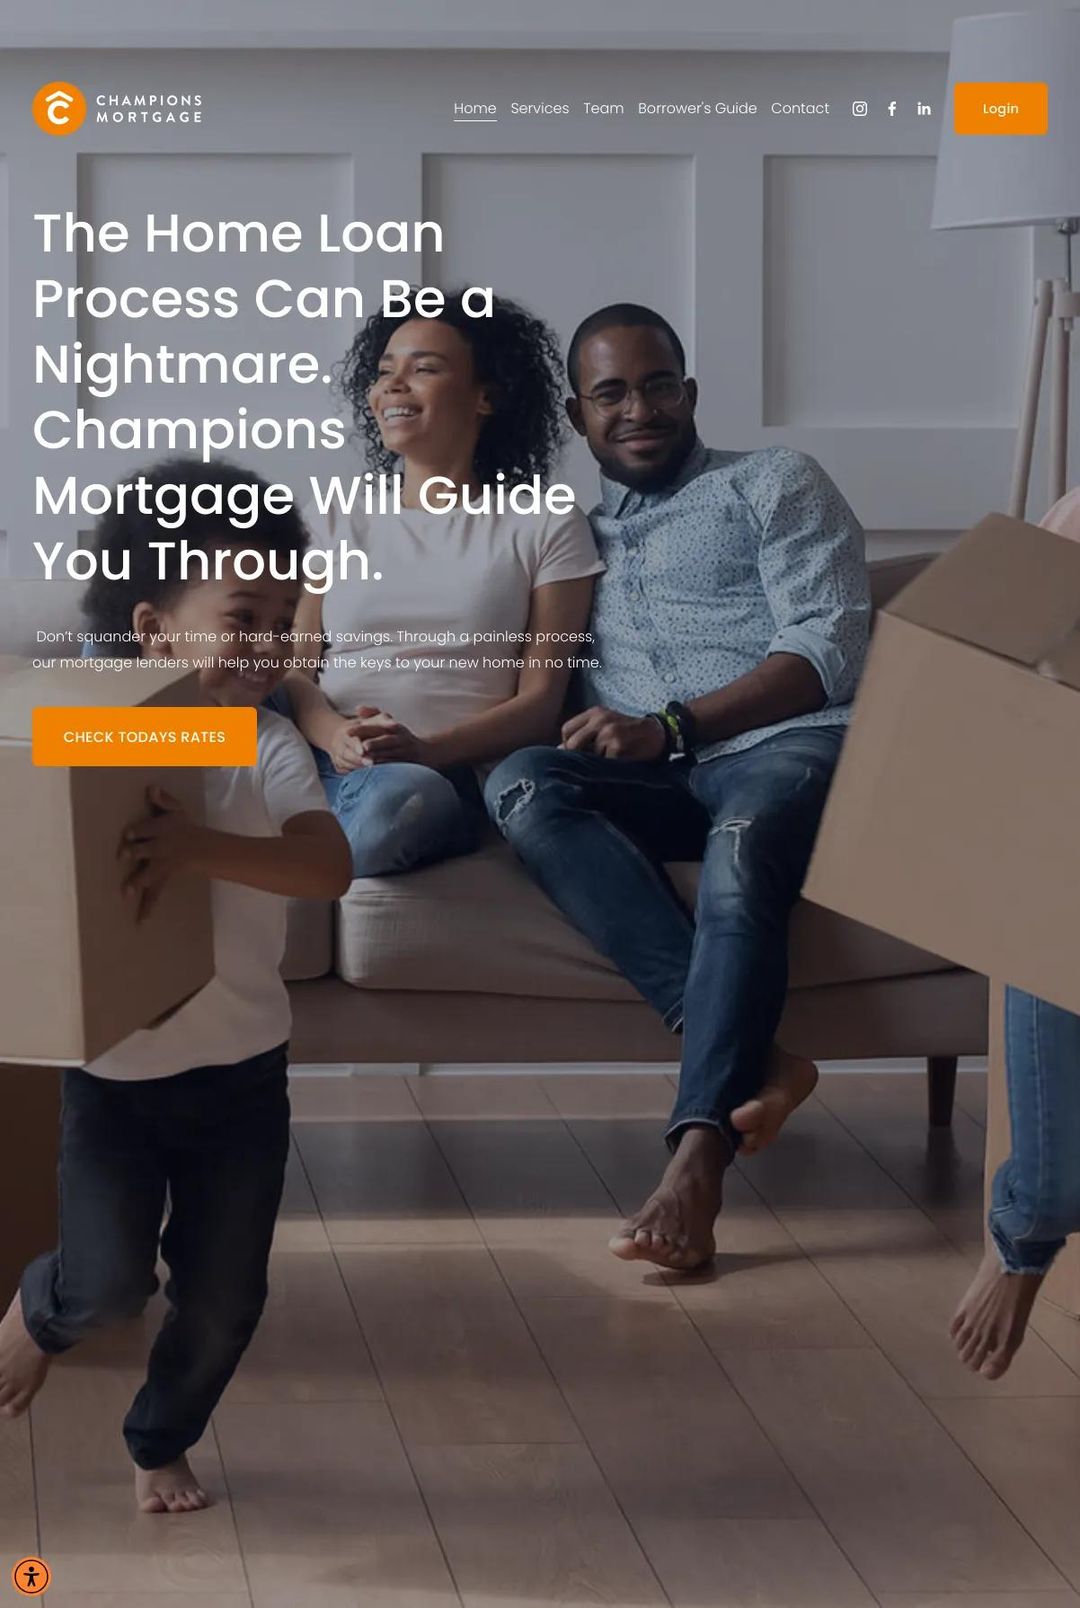 Screenshot 1 of Champions Mortgage (Example Squarespace Real Estate Website)